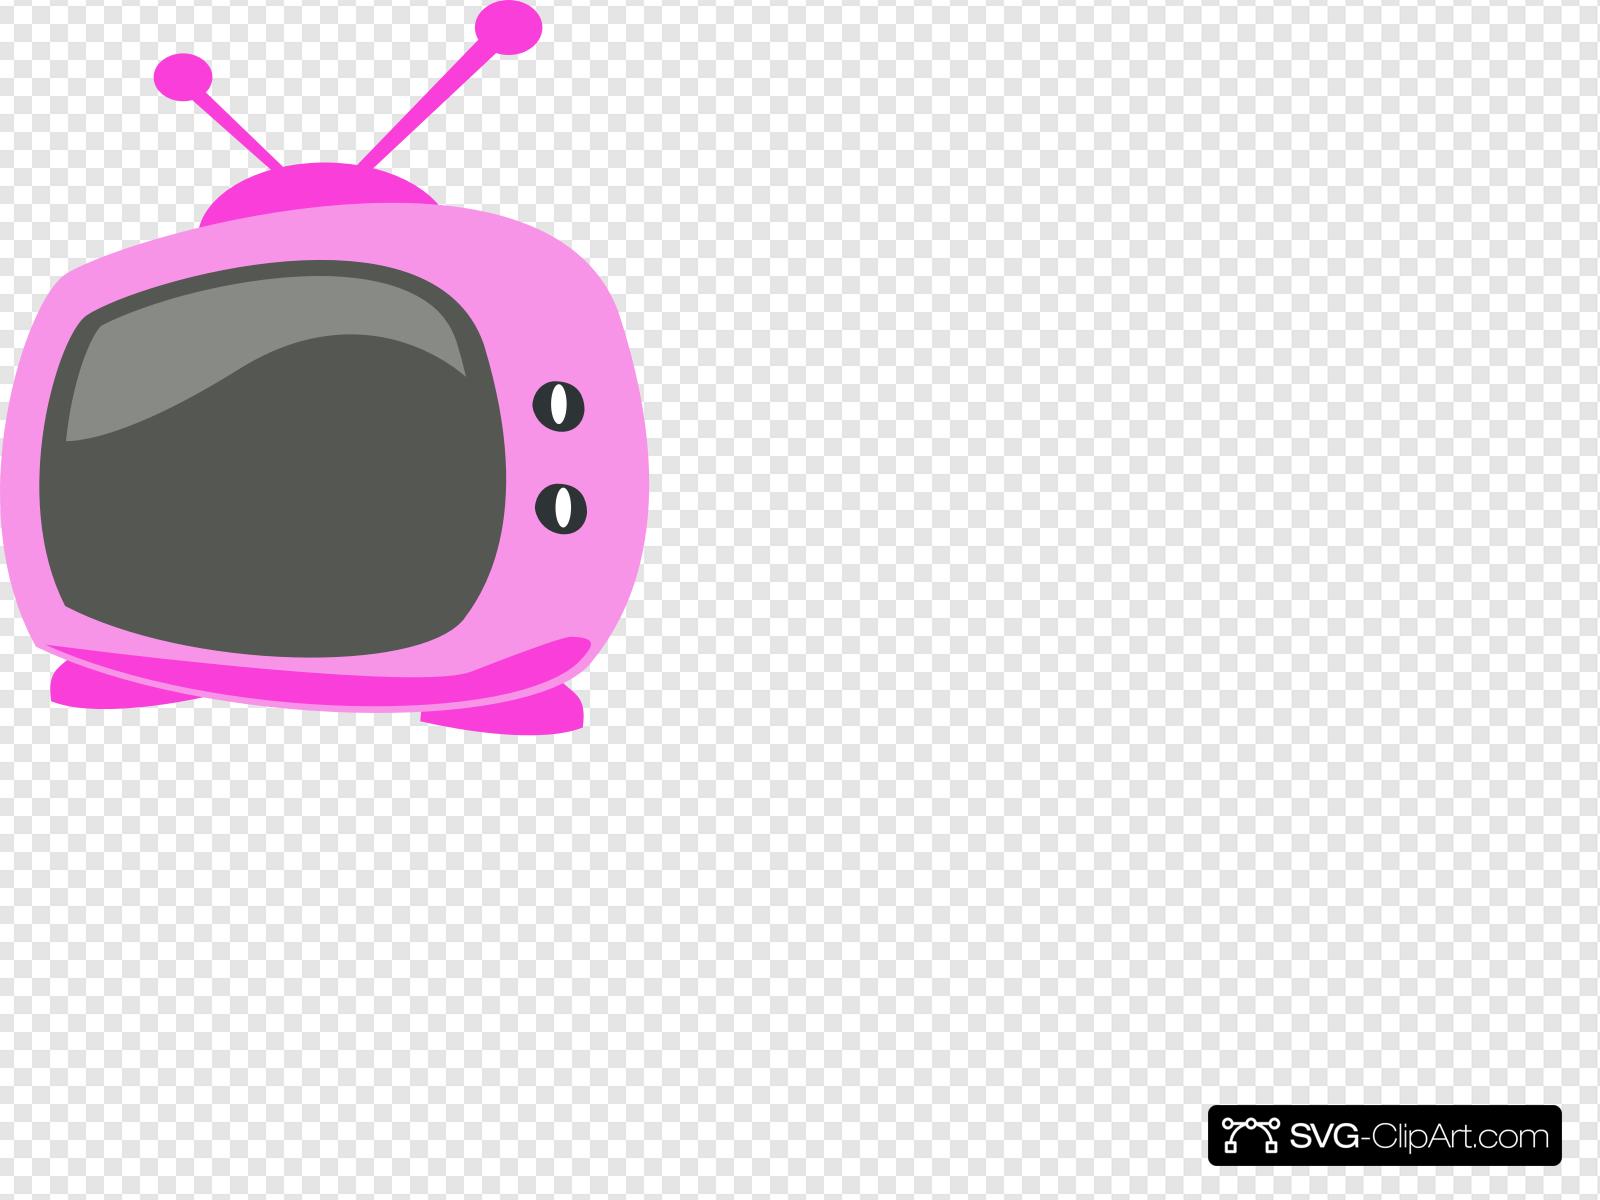 Pink Cartoon Tv Clip art, Icon and SVG